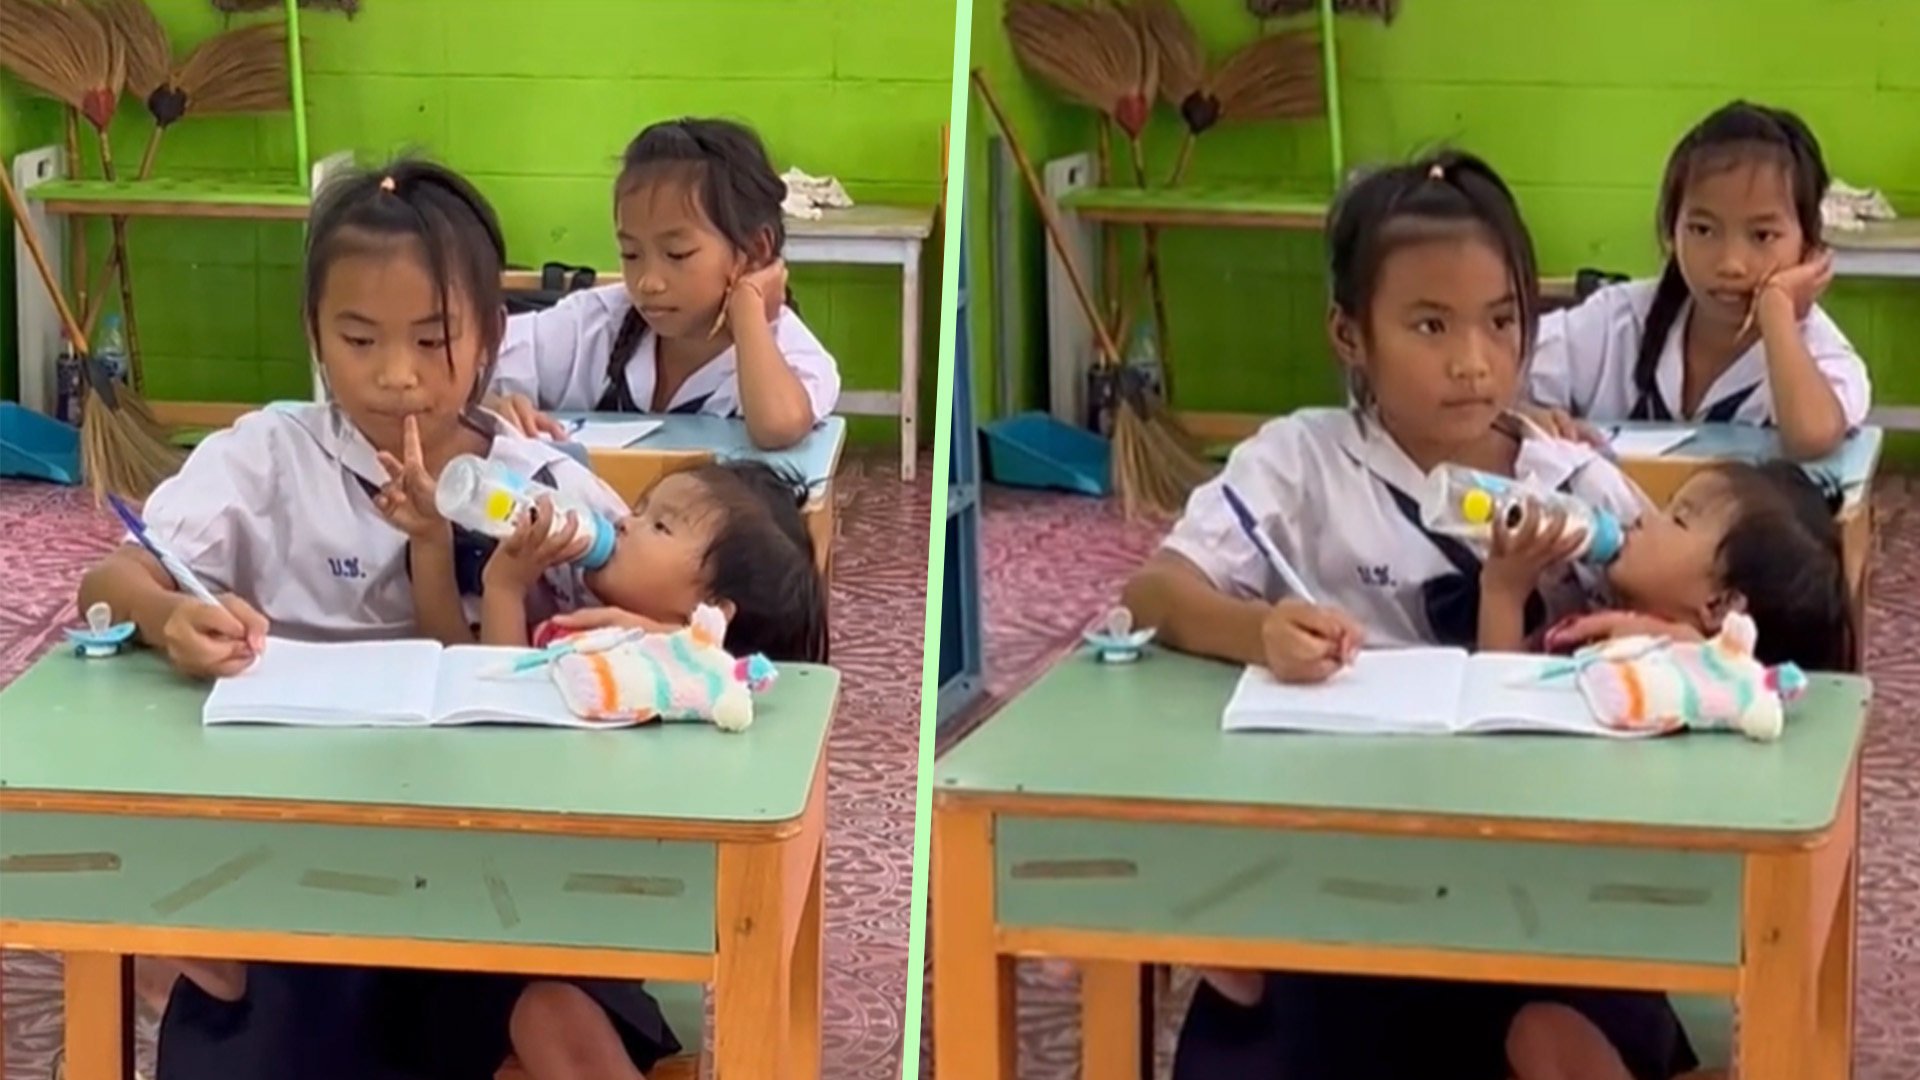 A 10-year-old girl in Thailand has melted hearts on social media after a video emerged of her feeding her baby sister milk while she took notes during class time. Photo: SCMP composite/TikTok